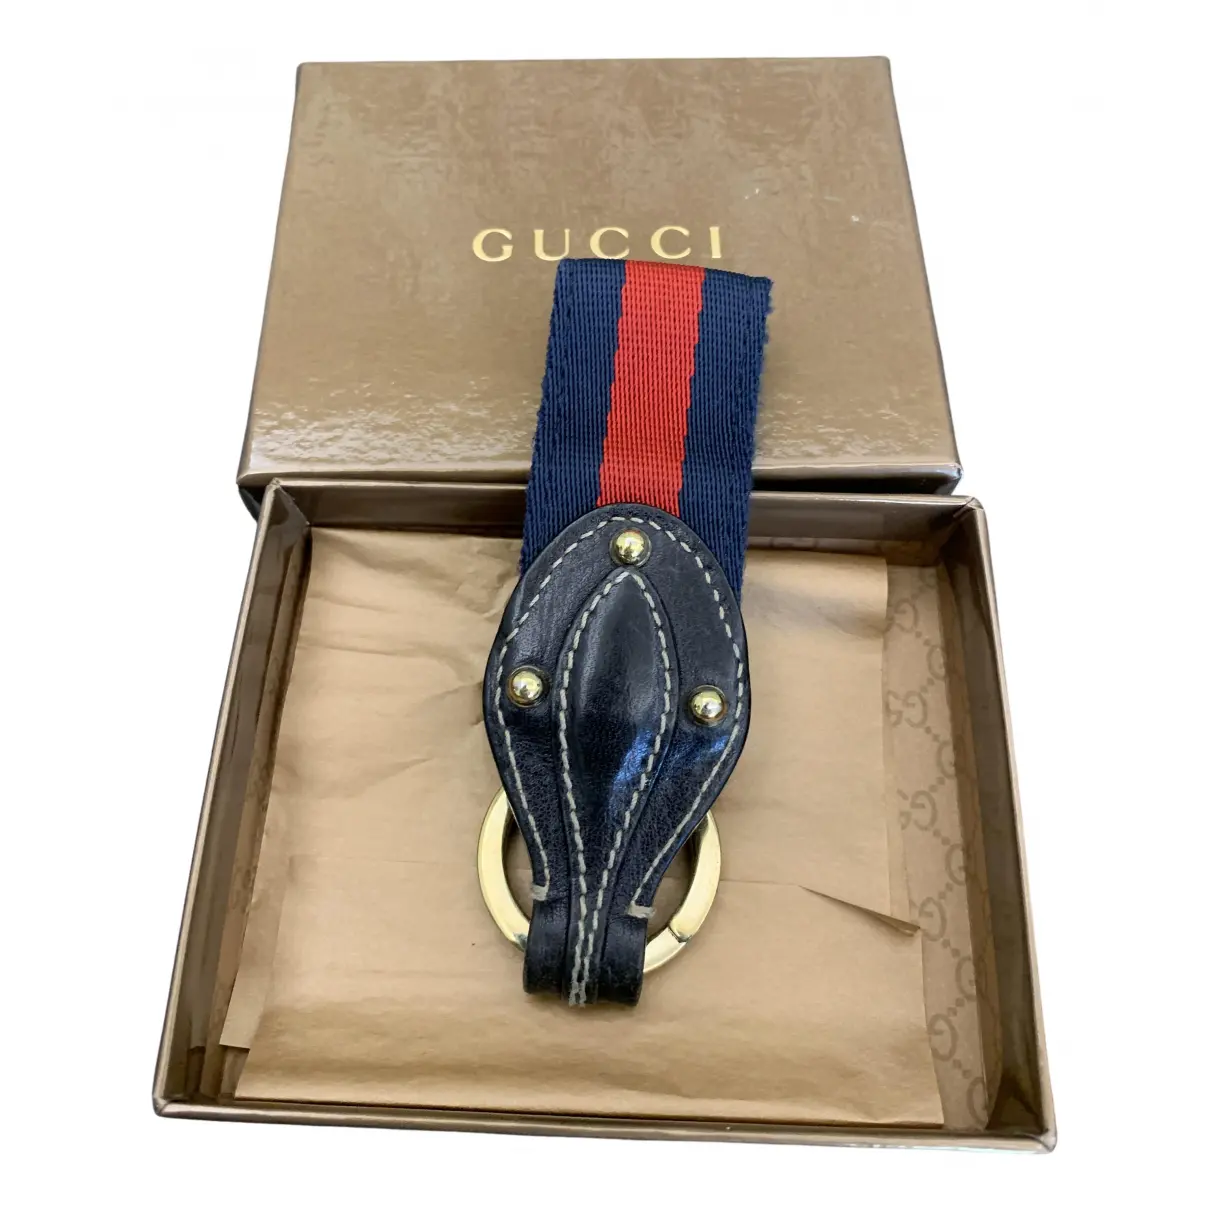 Buy Gucci Leather key ring online - Vintage